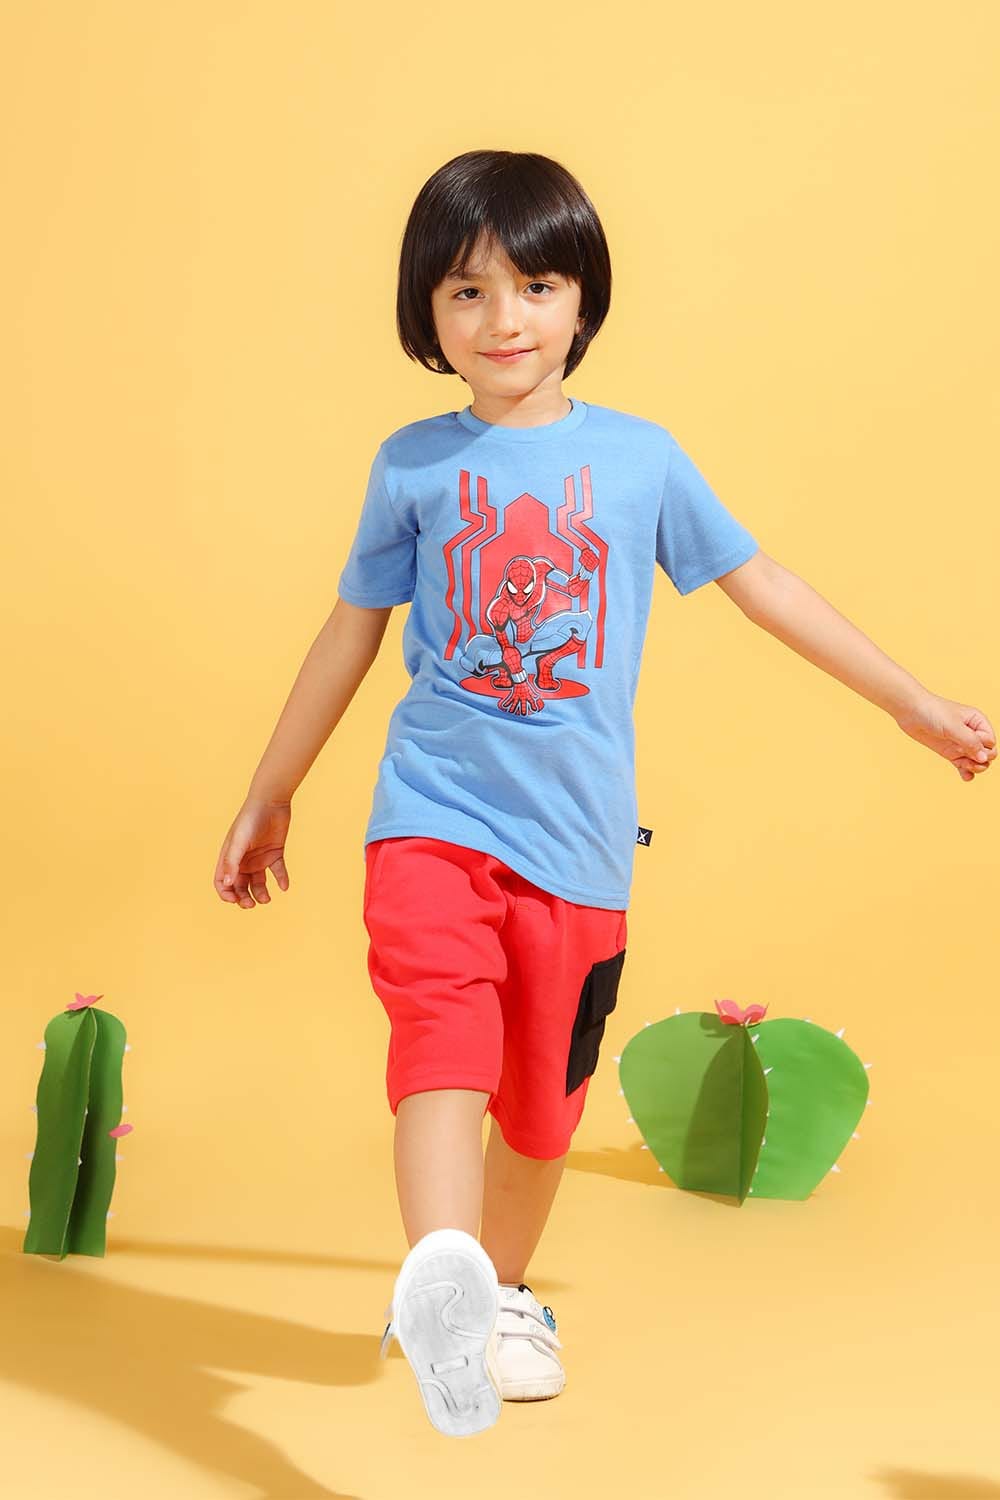 Hope Not Out by Shahid Afridi Boys Knit T-Shirt Sky Blue Half Sleeves T-Shirt with Spider Man Graphic for Boys